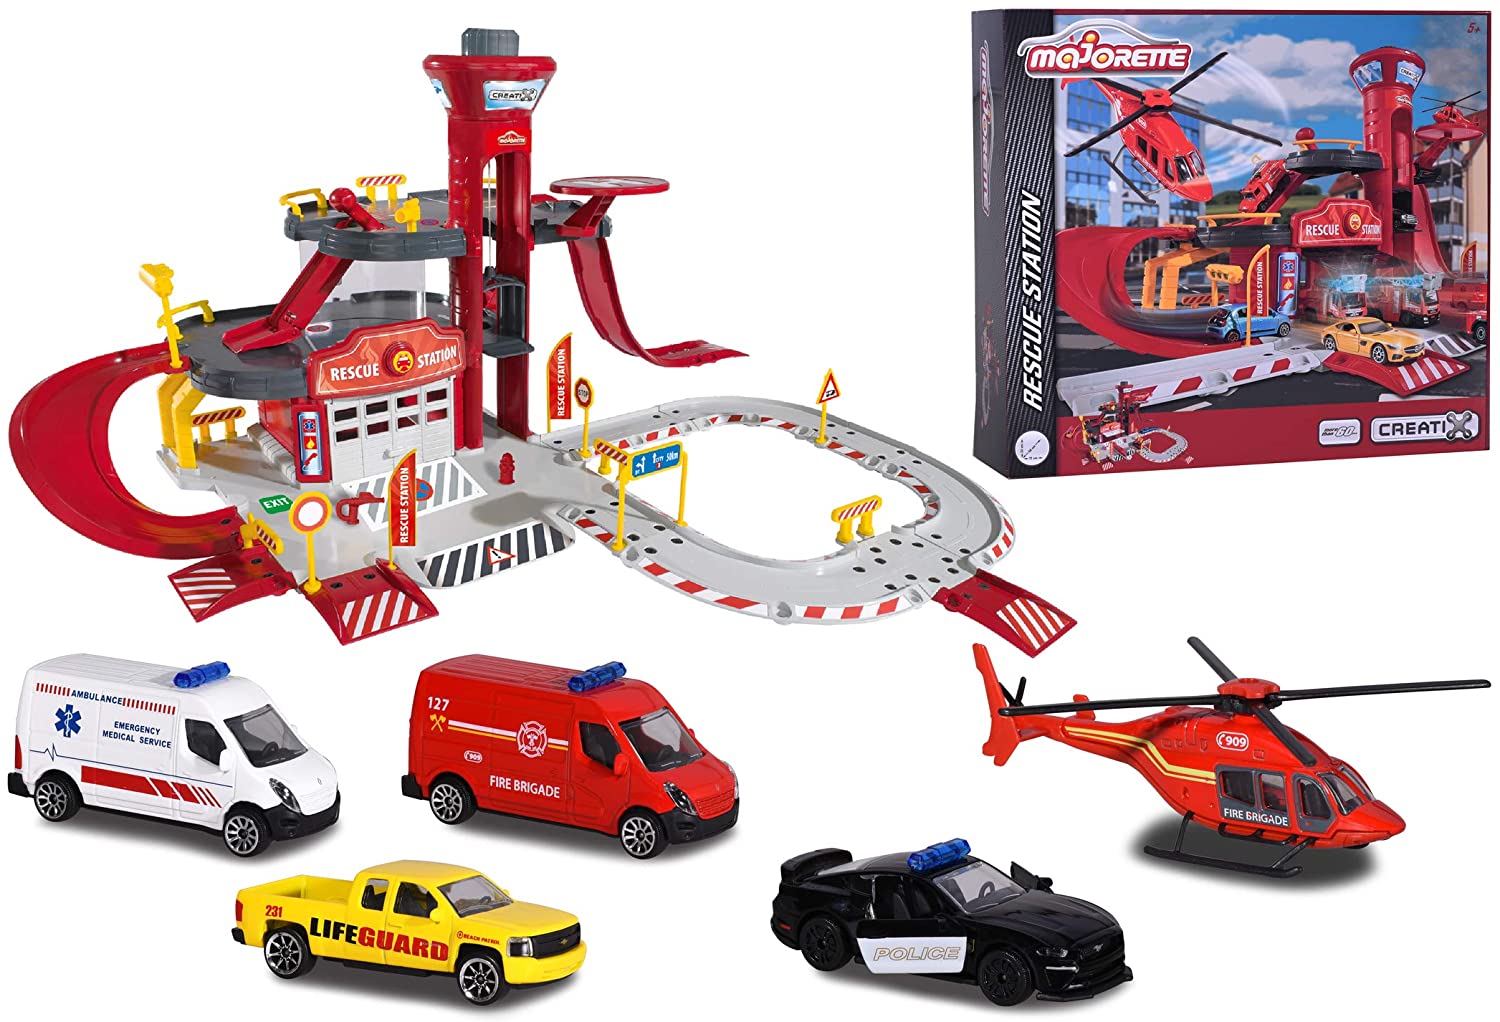 Majorette 212050019 Creatix Rescue Station + 5 Vehicles Playset With Large 